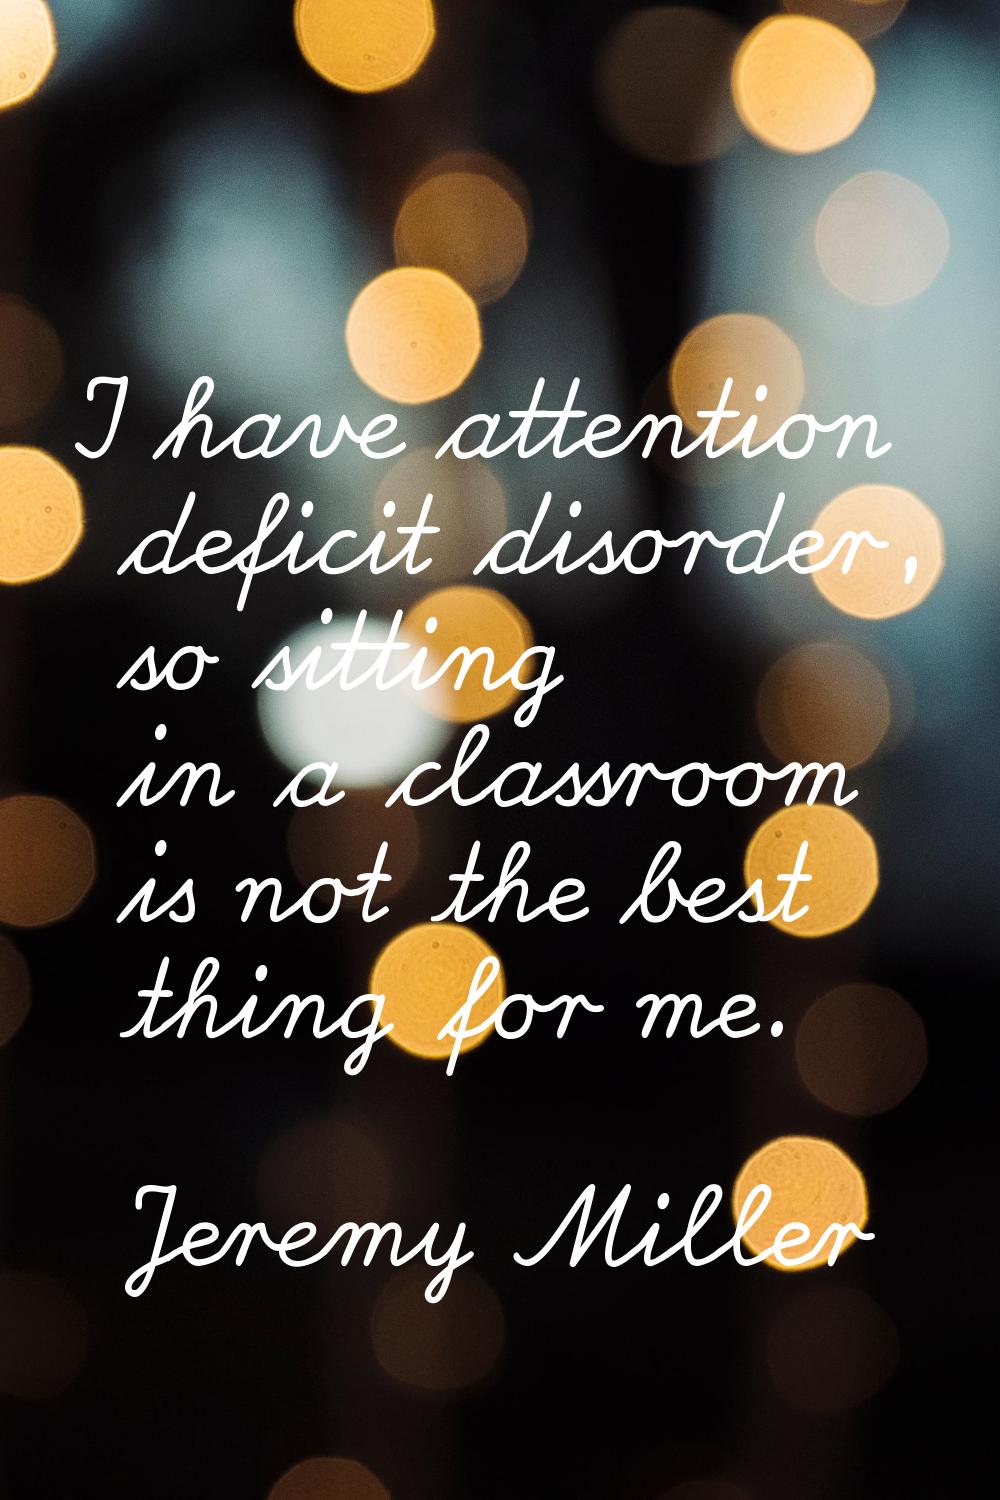 I have attention deficit disorder, so sitting in a classroom is not the best thing for me.